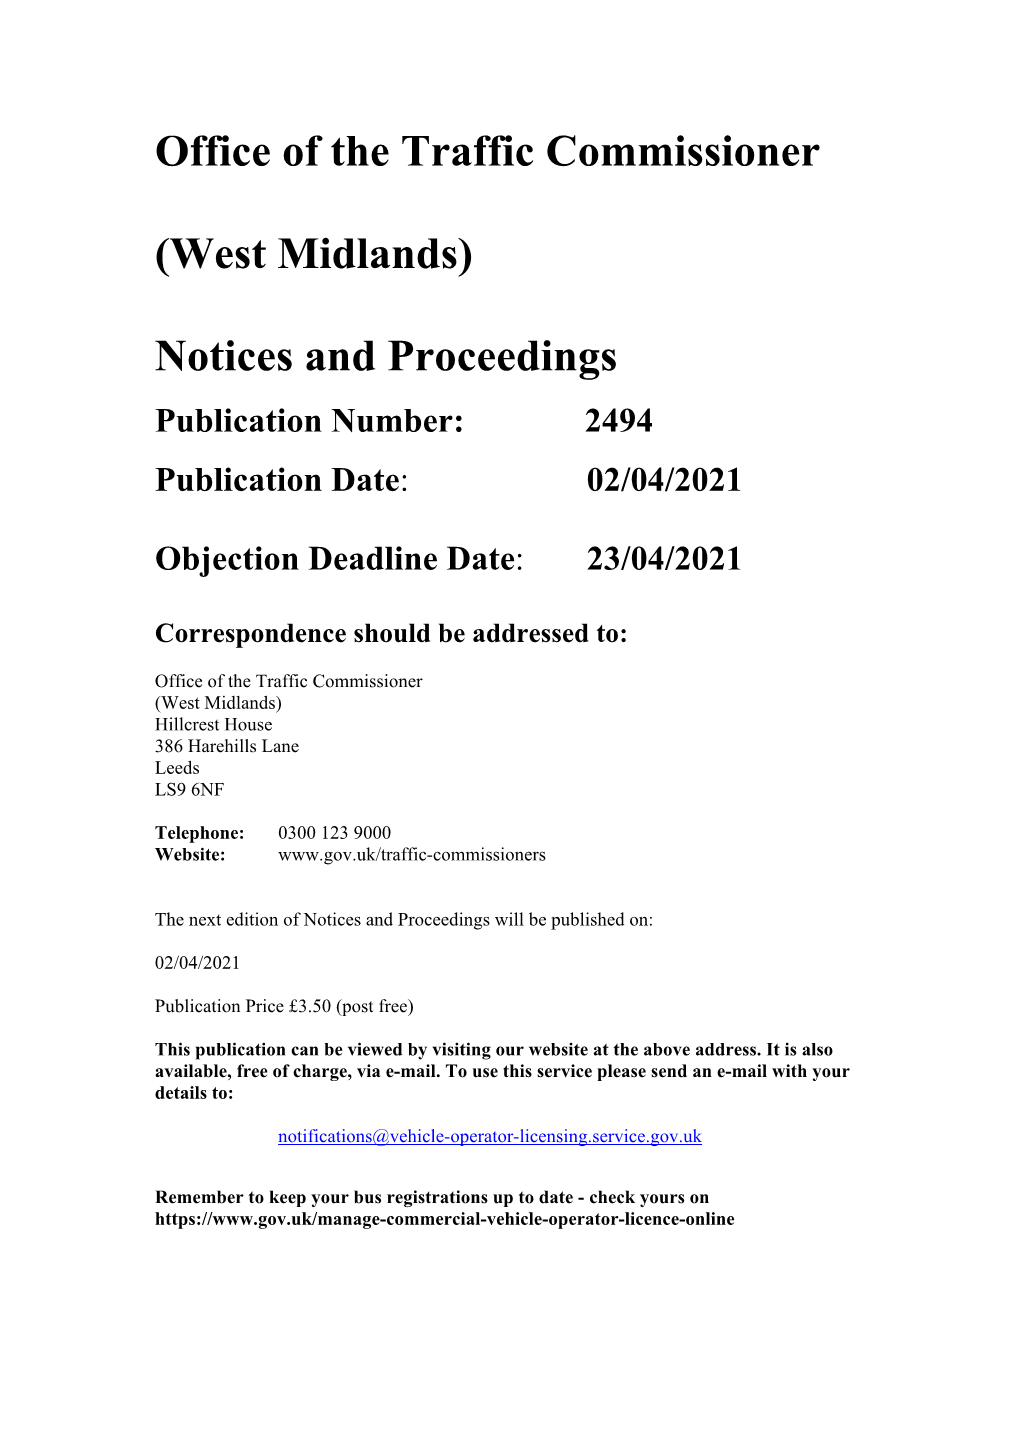 Notices and Proceedings for the West Midlands 2494